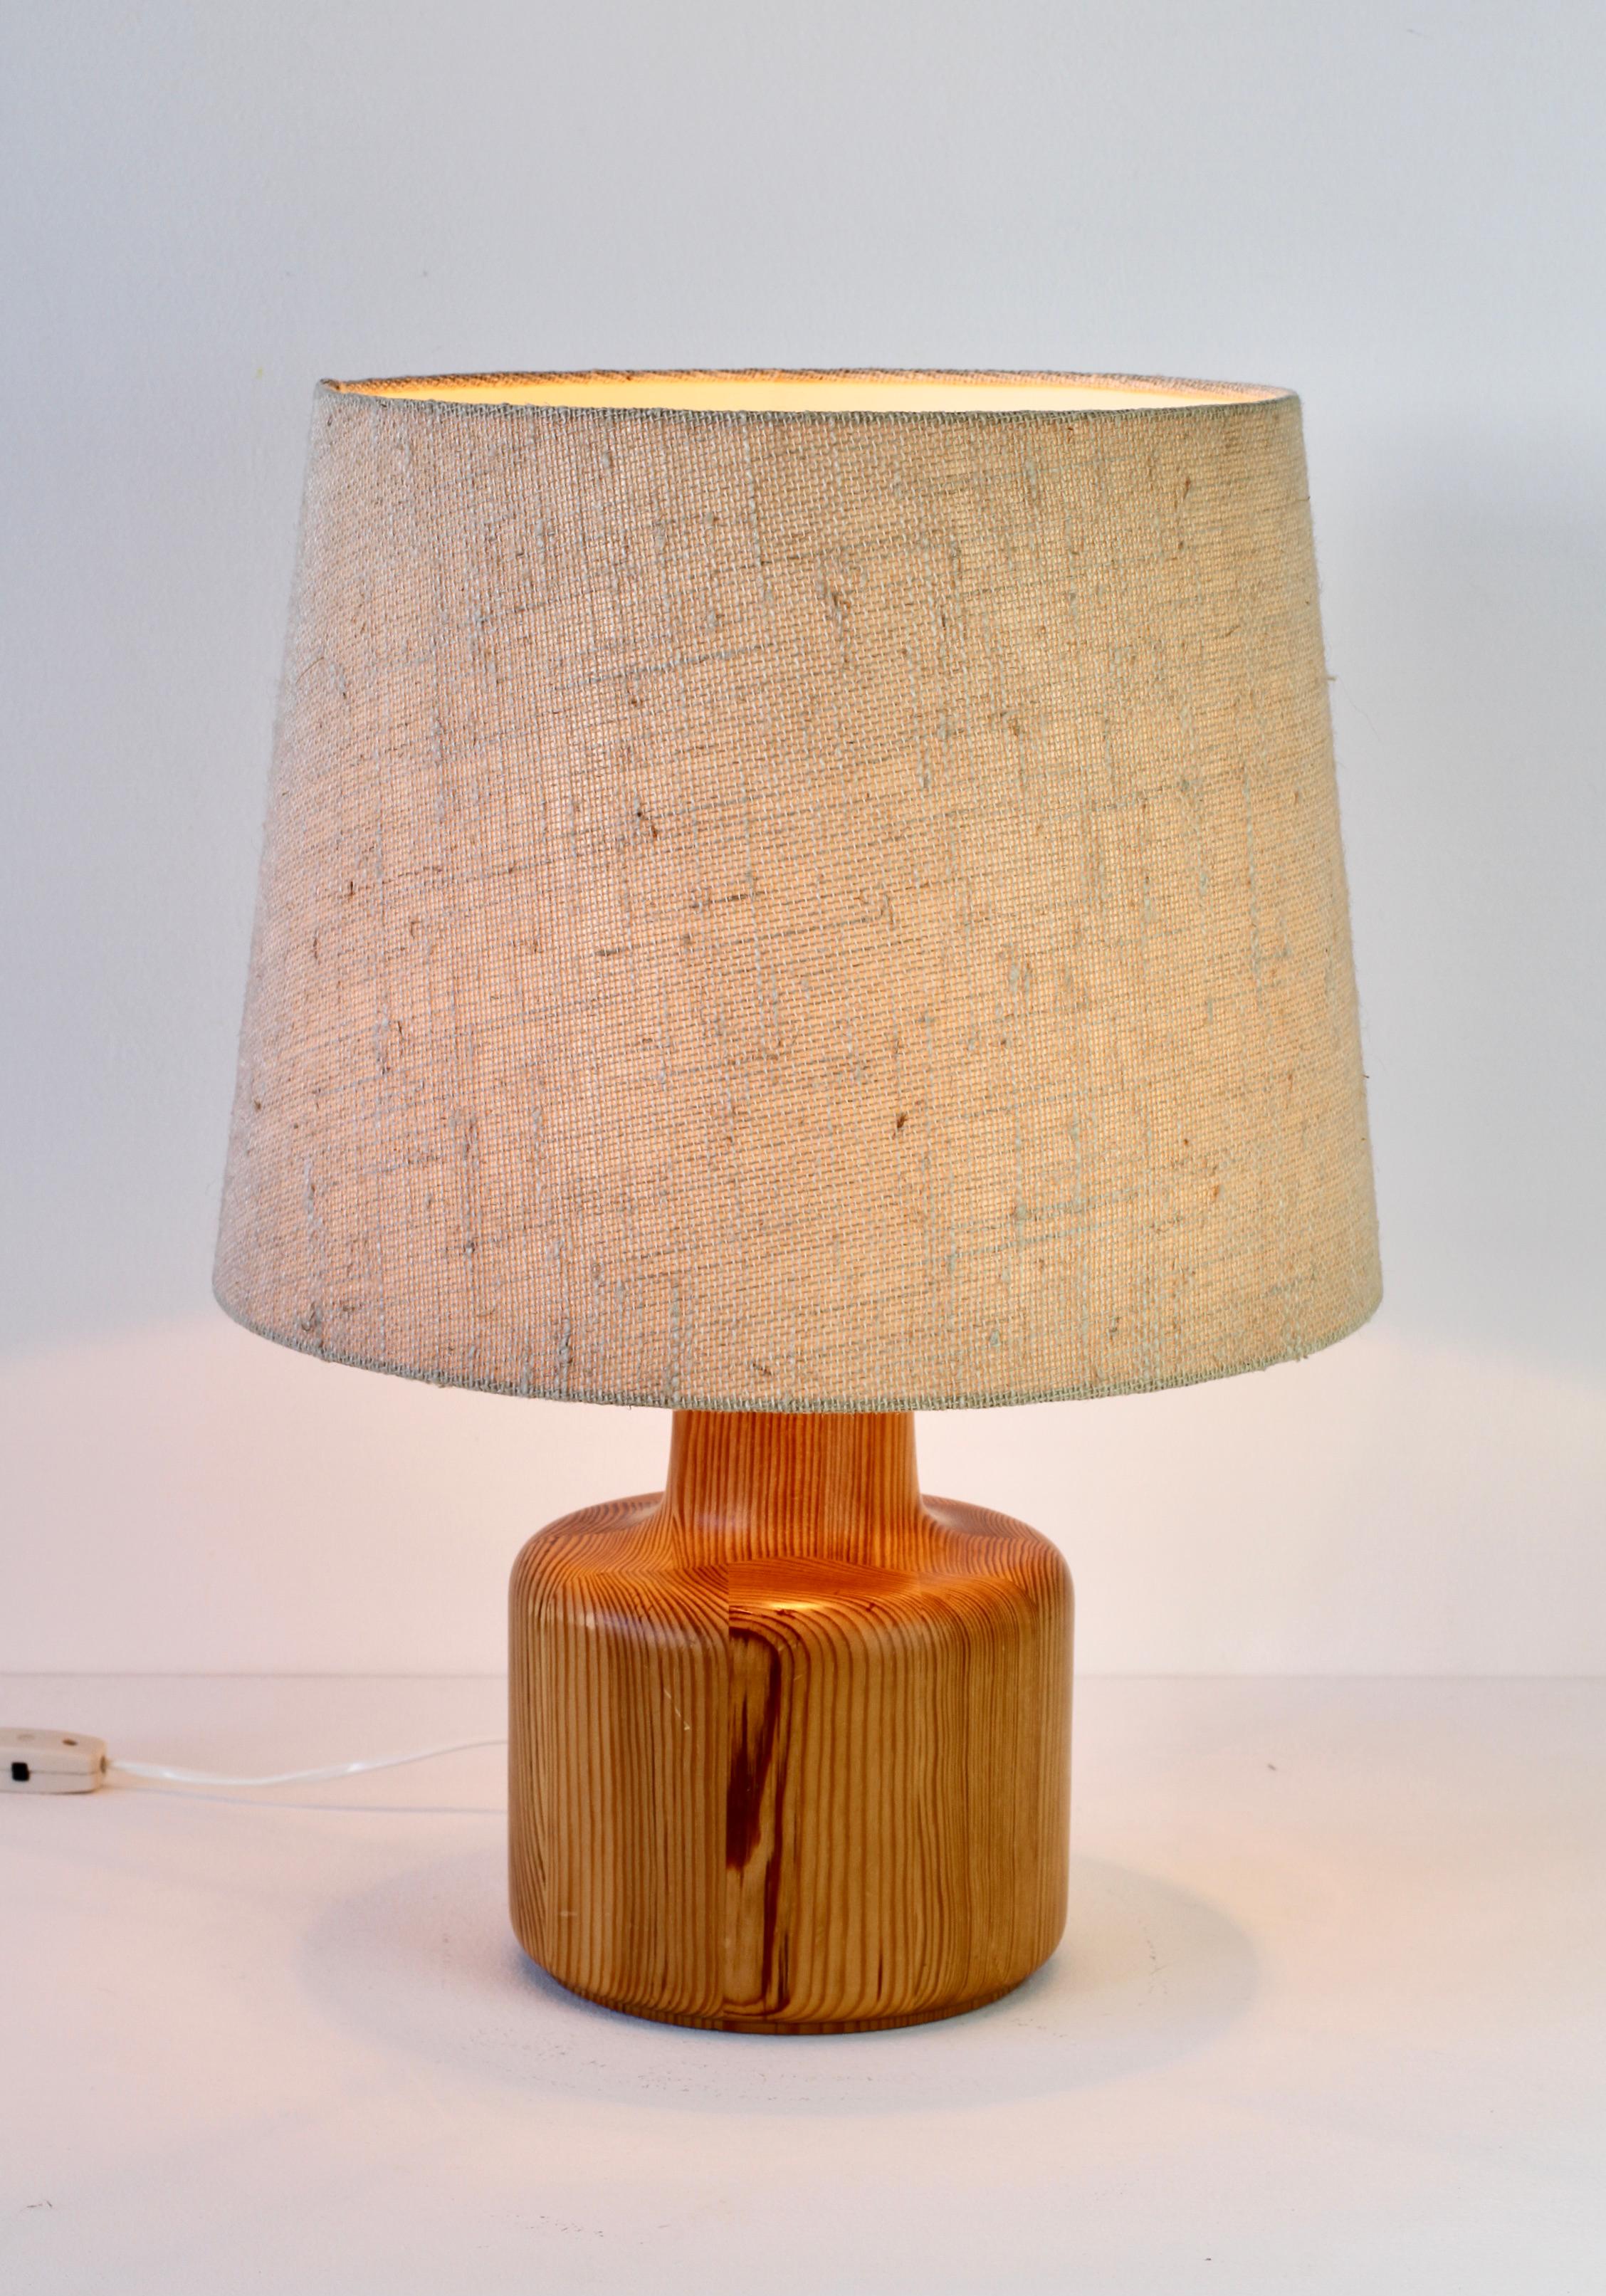 Carved 1970s Large Scandinavian Style Pine Wood Table Light Lamp Original Fabric Shade